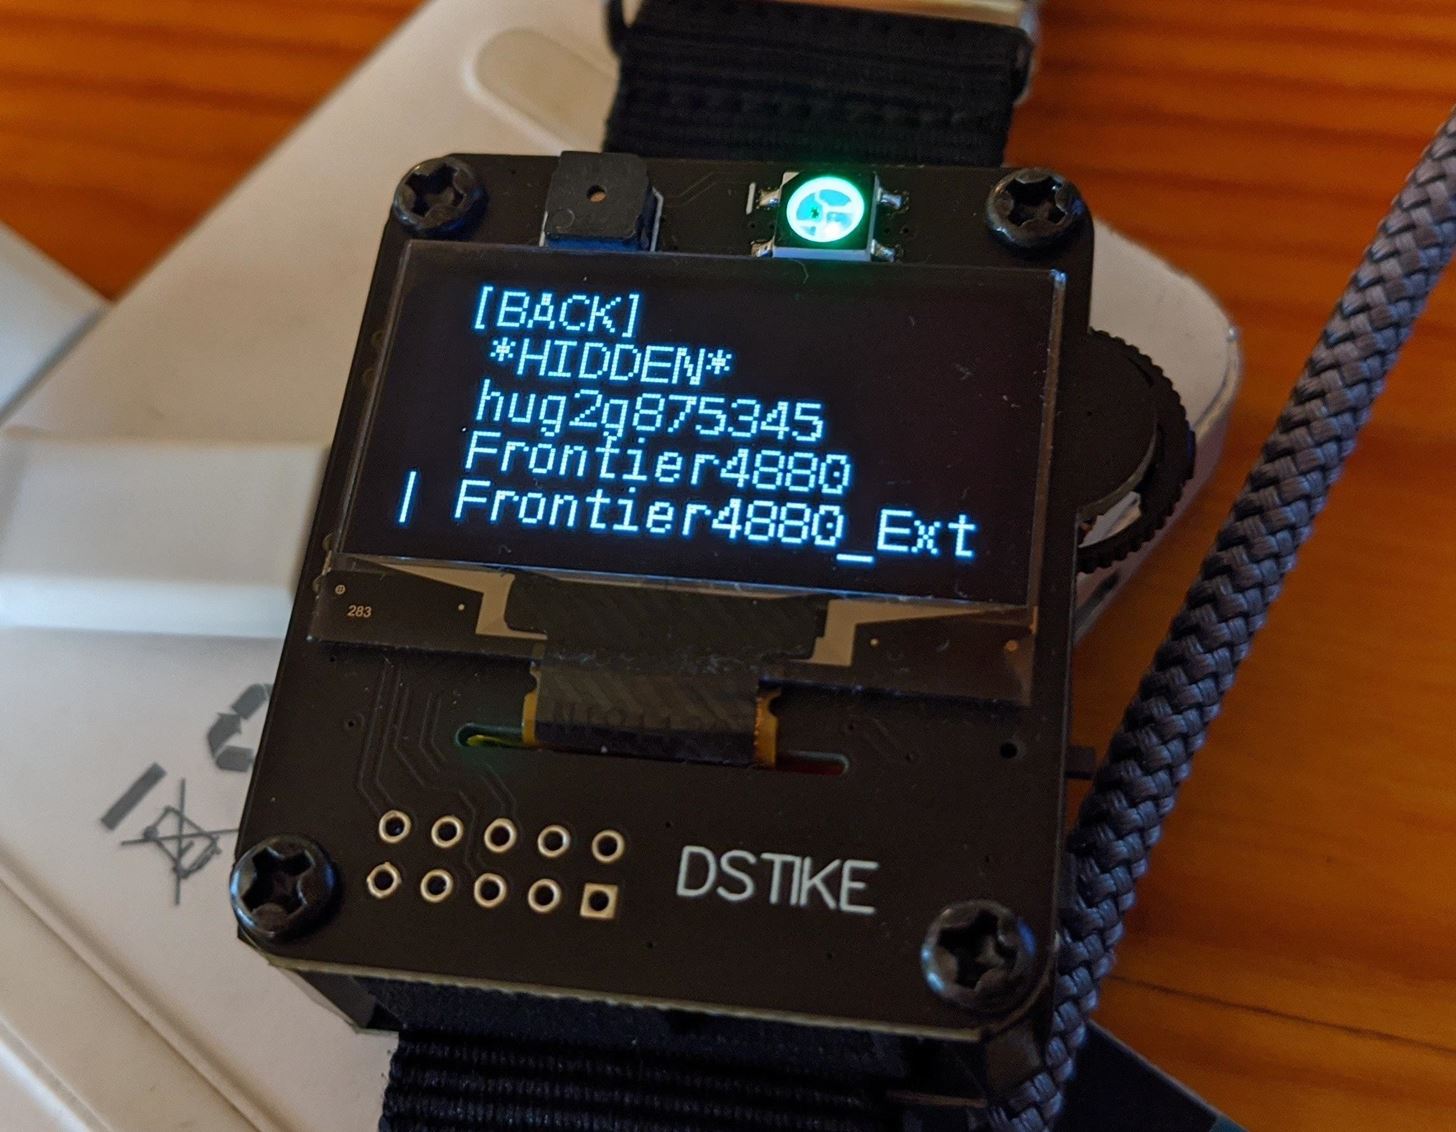 Hack Networks & Devices Right from Your Wrist with the Wi-Fi Deauther Watch